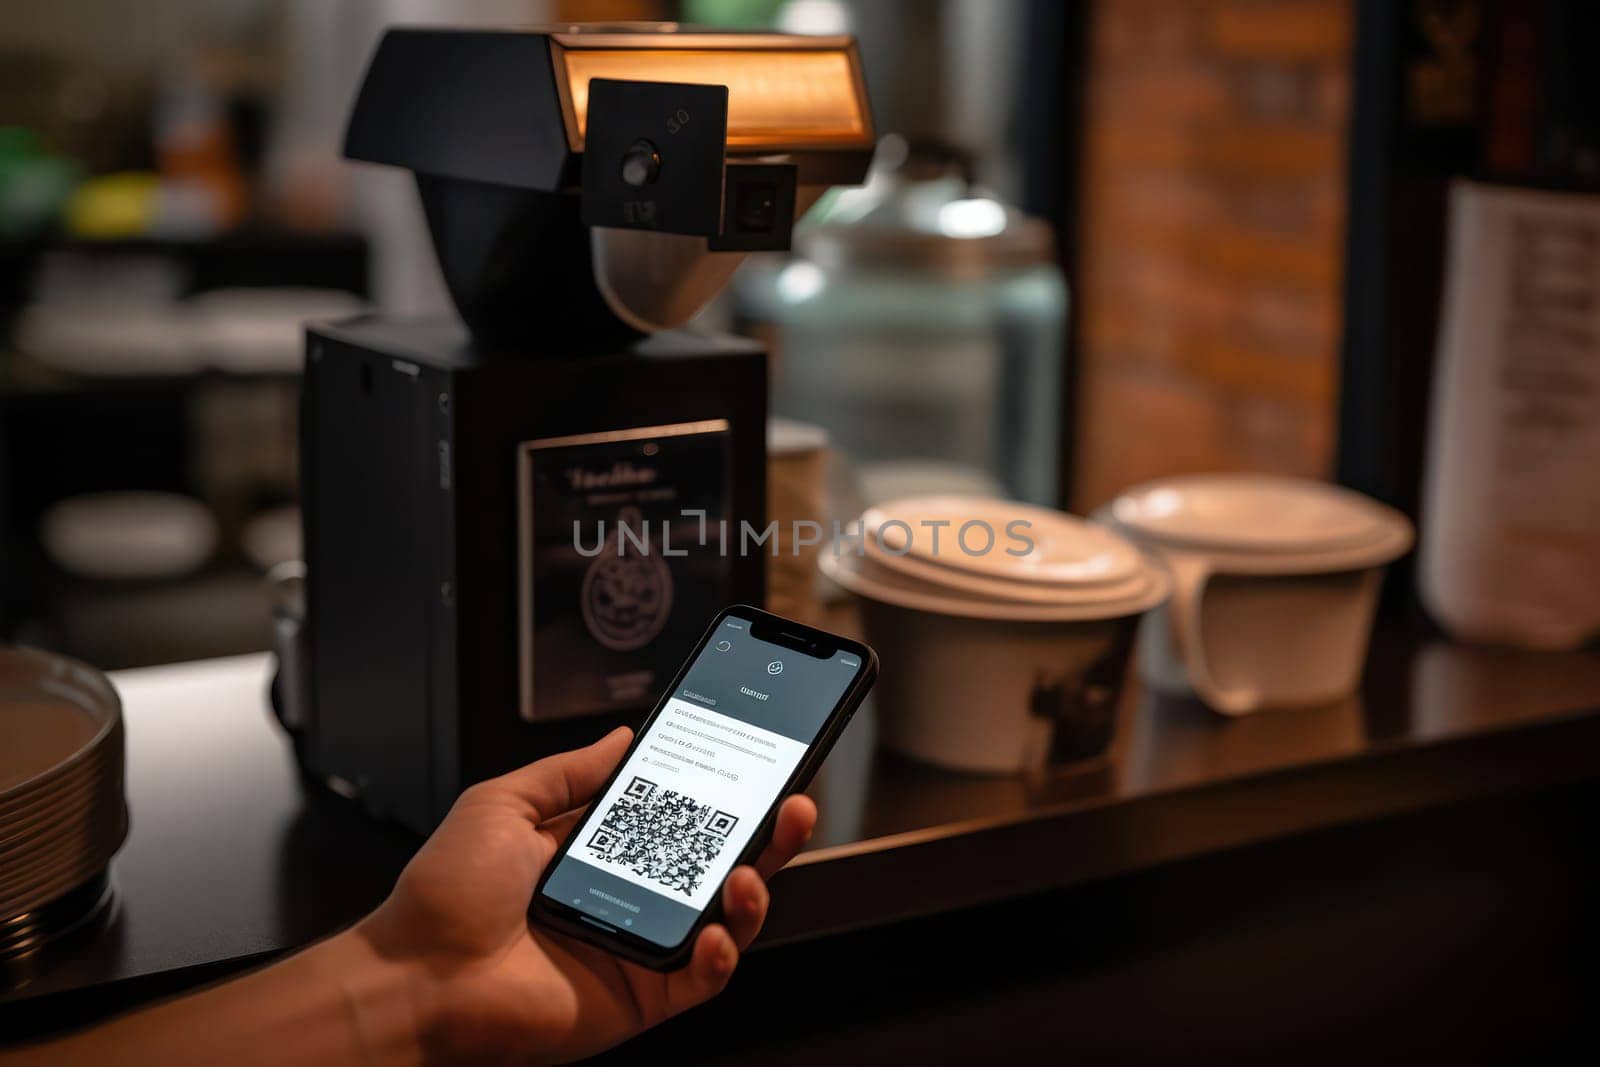 Smartphone-driven Digital Payment Revolution: Handheld Barcode Scanner, Cashier Transactions at Retail Store